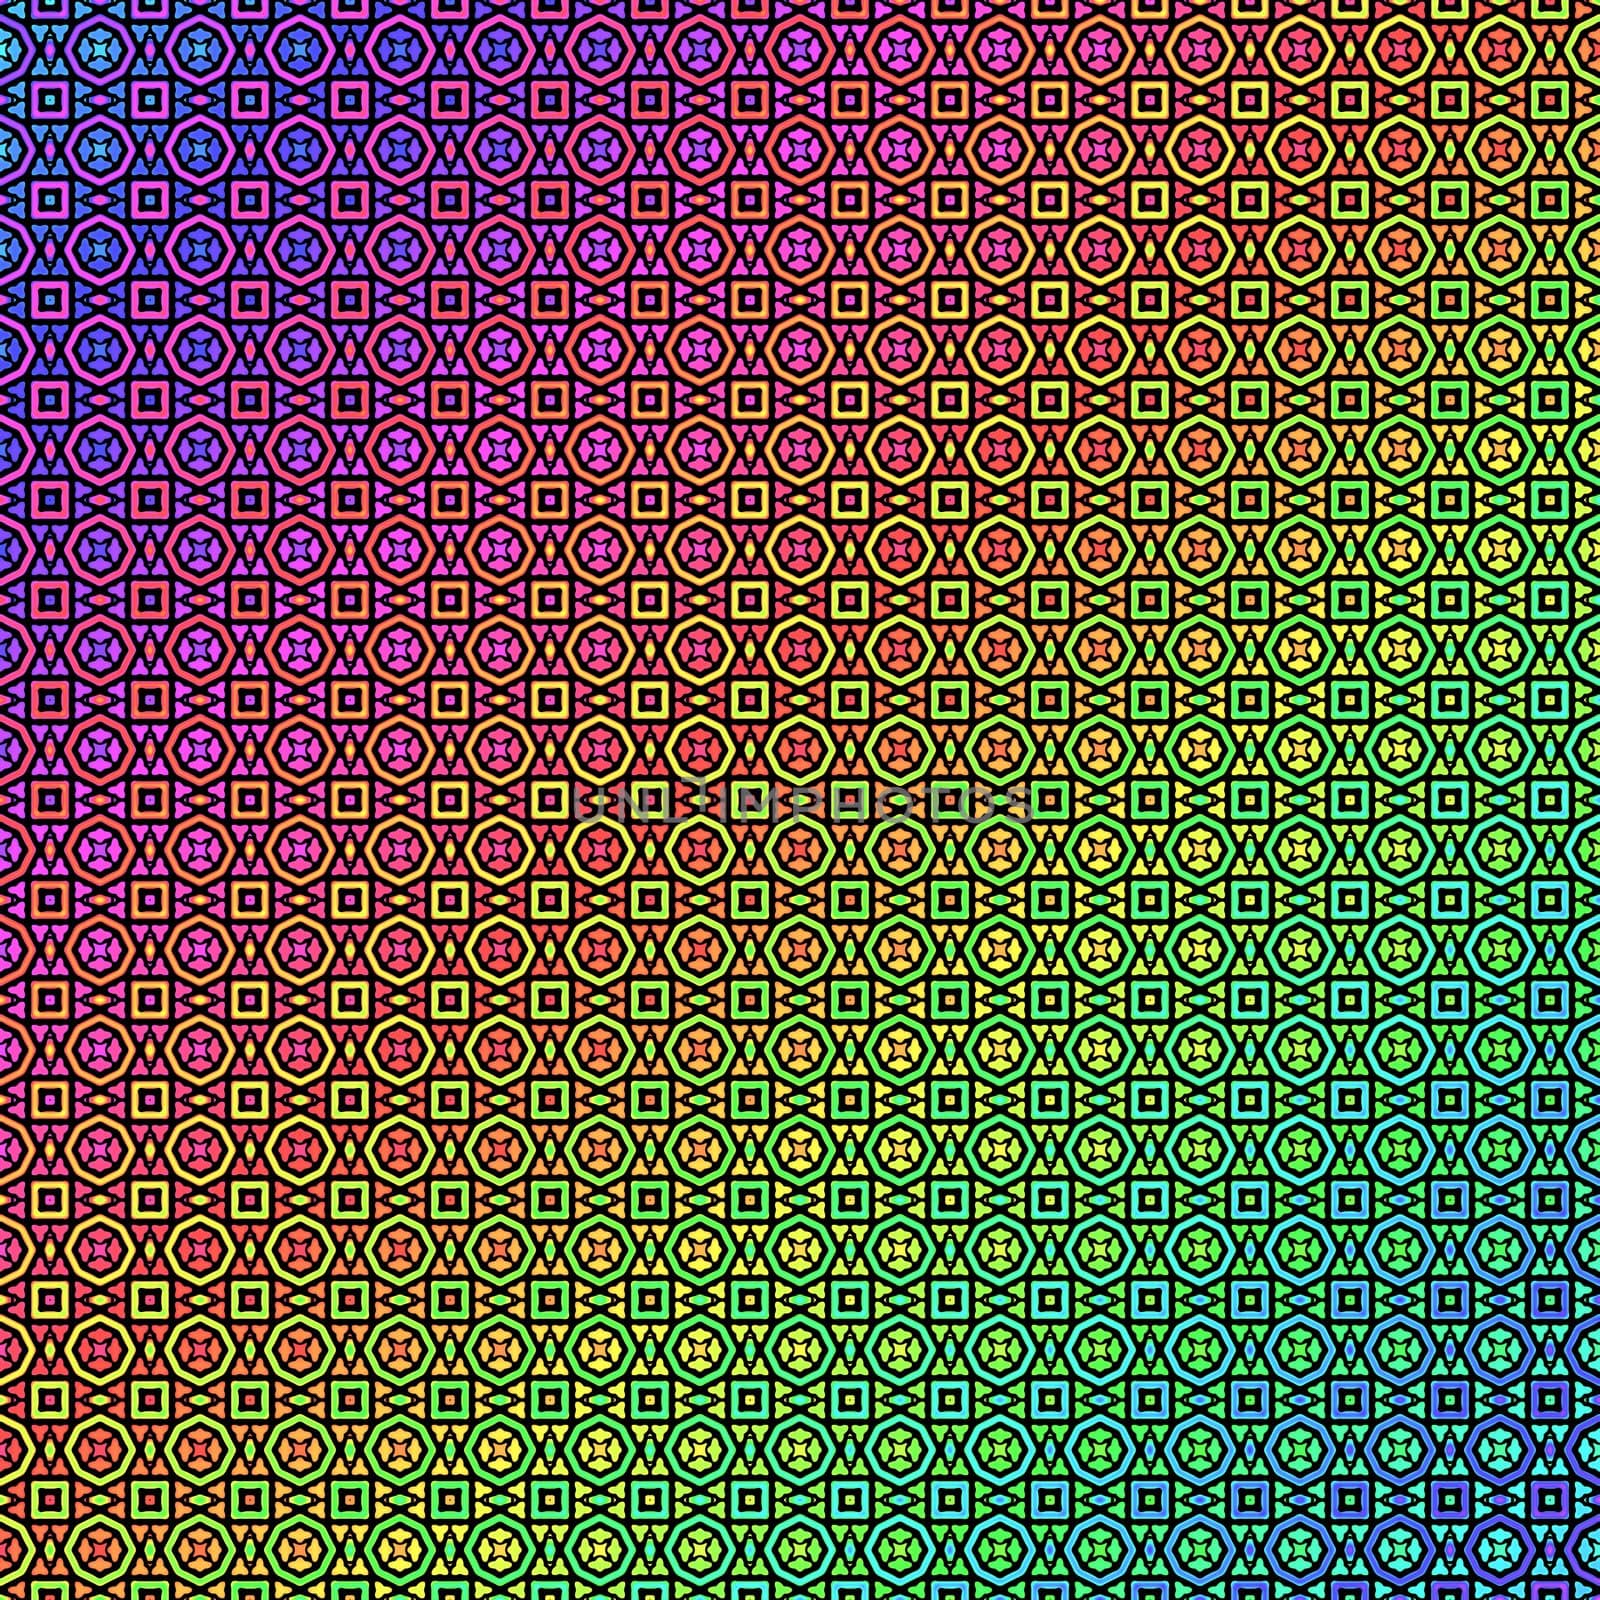 pattern of glowing shapes in spectrum colors